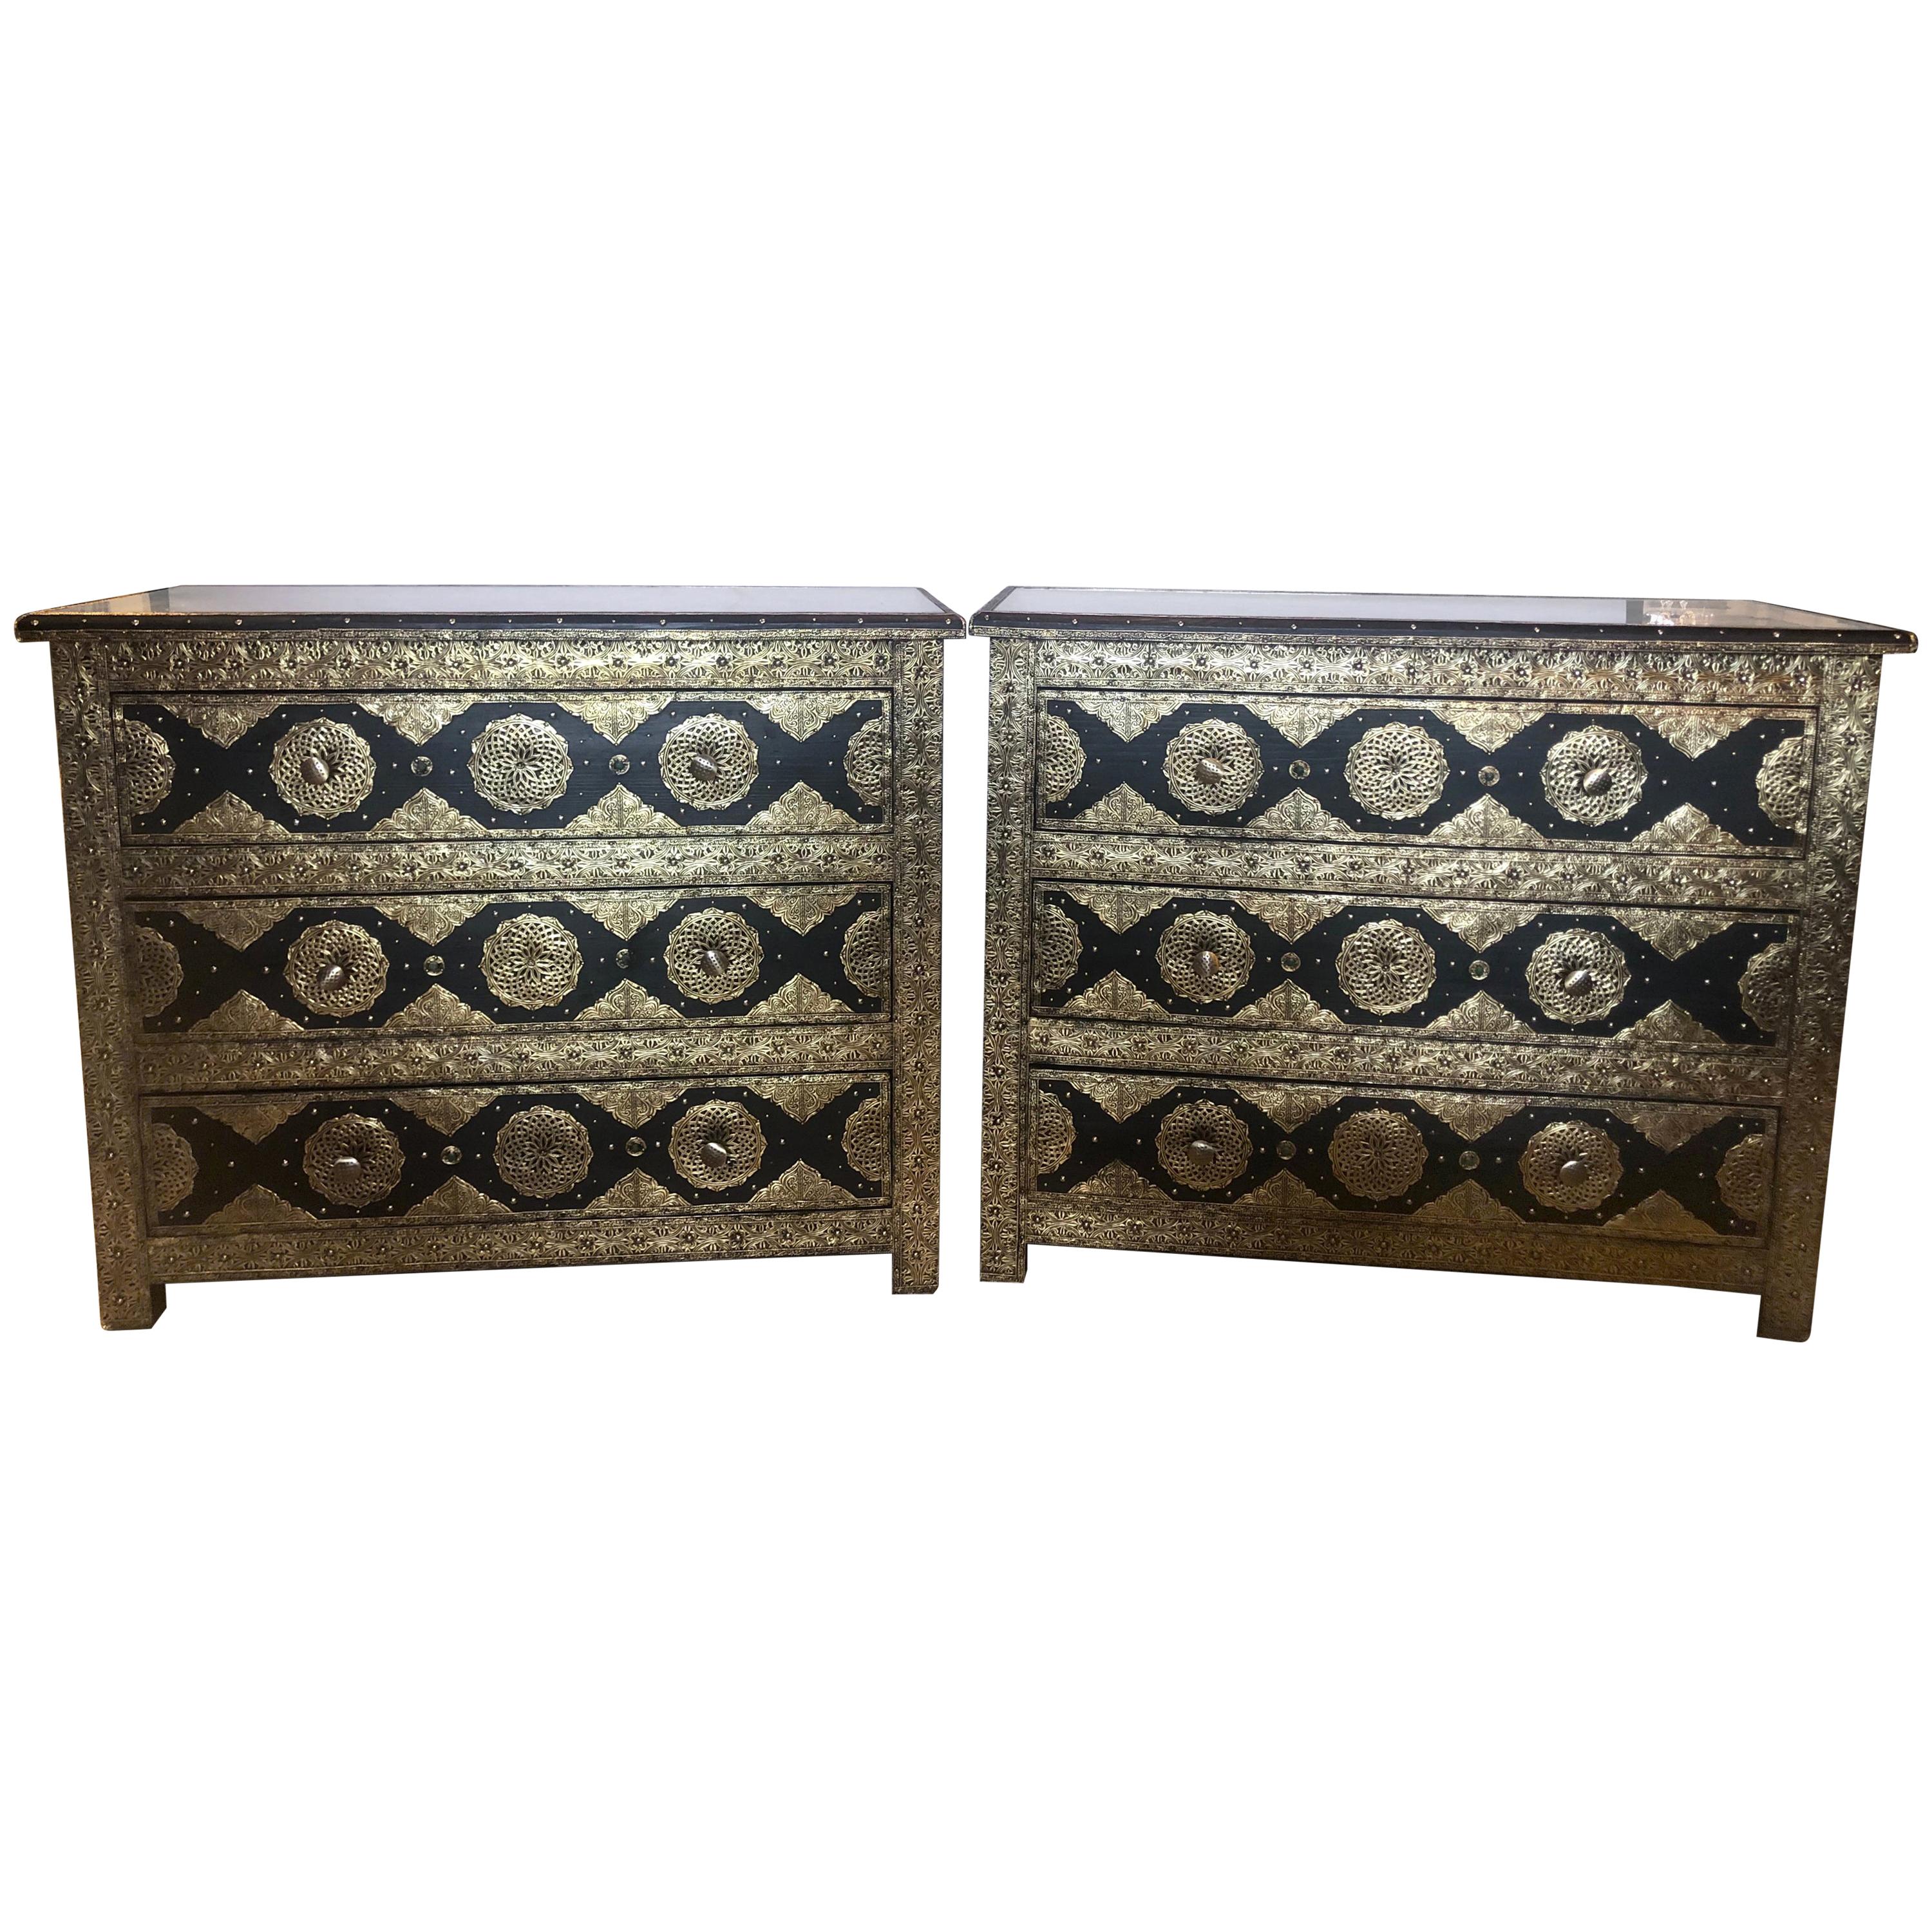 Brass & Ebony Hollywood Regency Style Moroccan Commodes Chests Nightstands, Pair